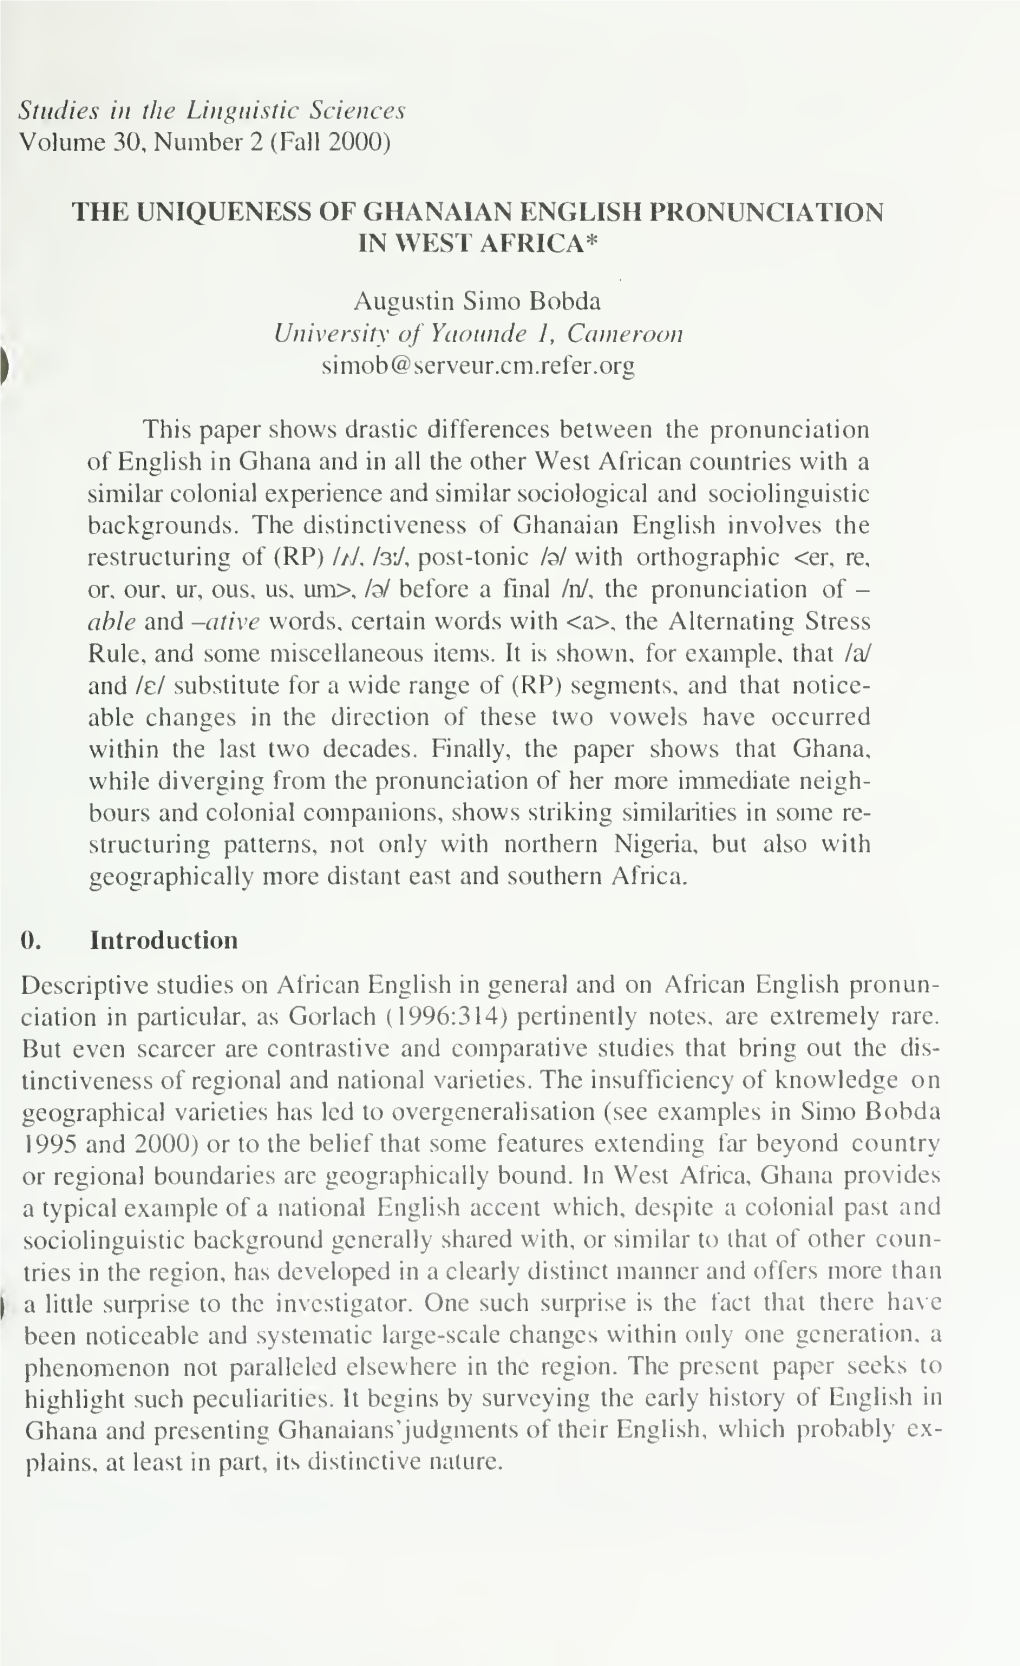 The Uniqueness of Ghanaian English Pronunciation in West Africa*